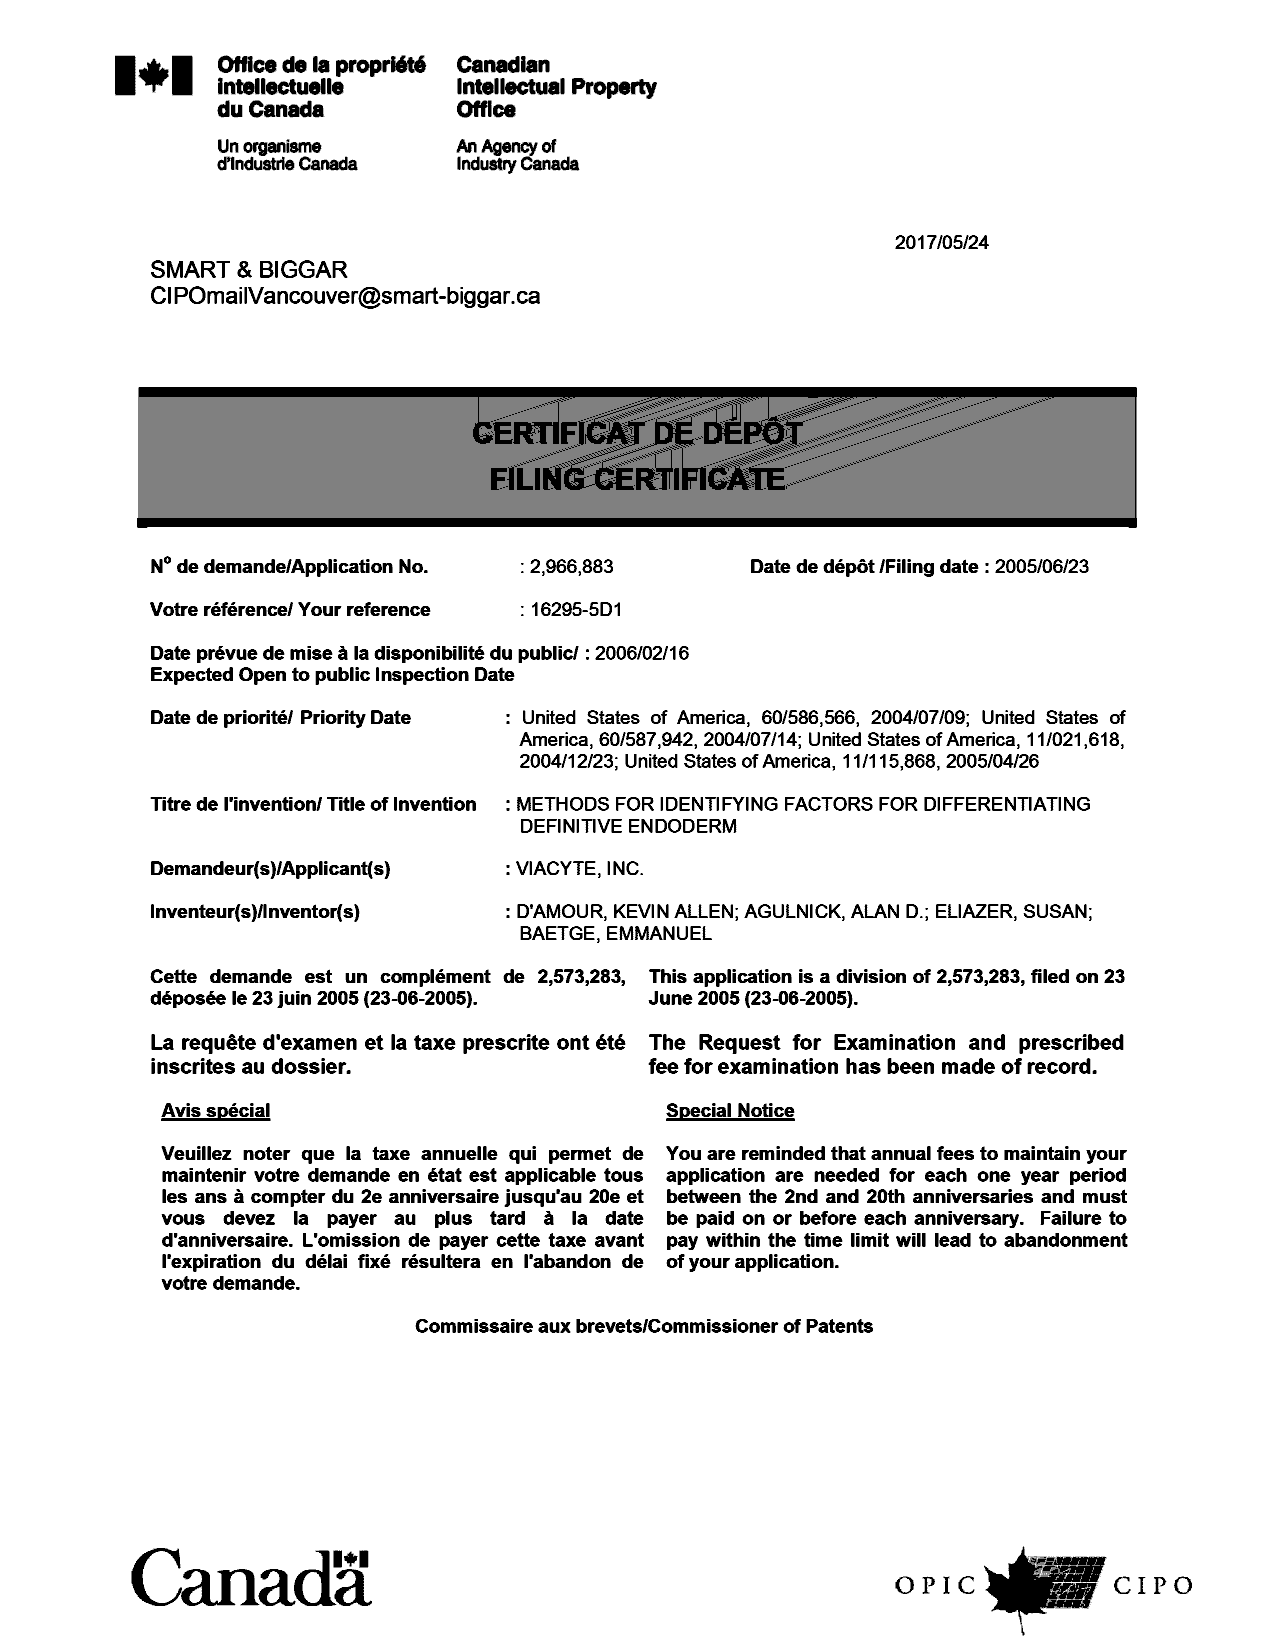 Canadian Patent Document 2966883. Divisional - Filing Certificate 20170524. Image 1 of 1